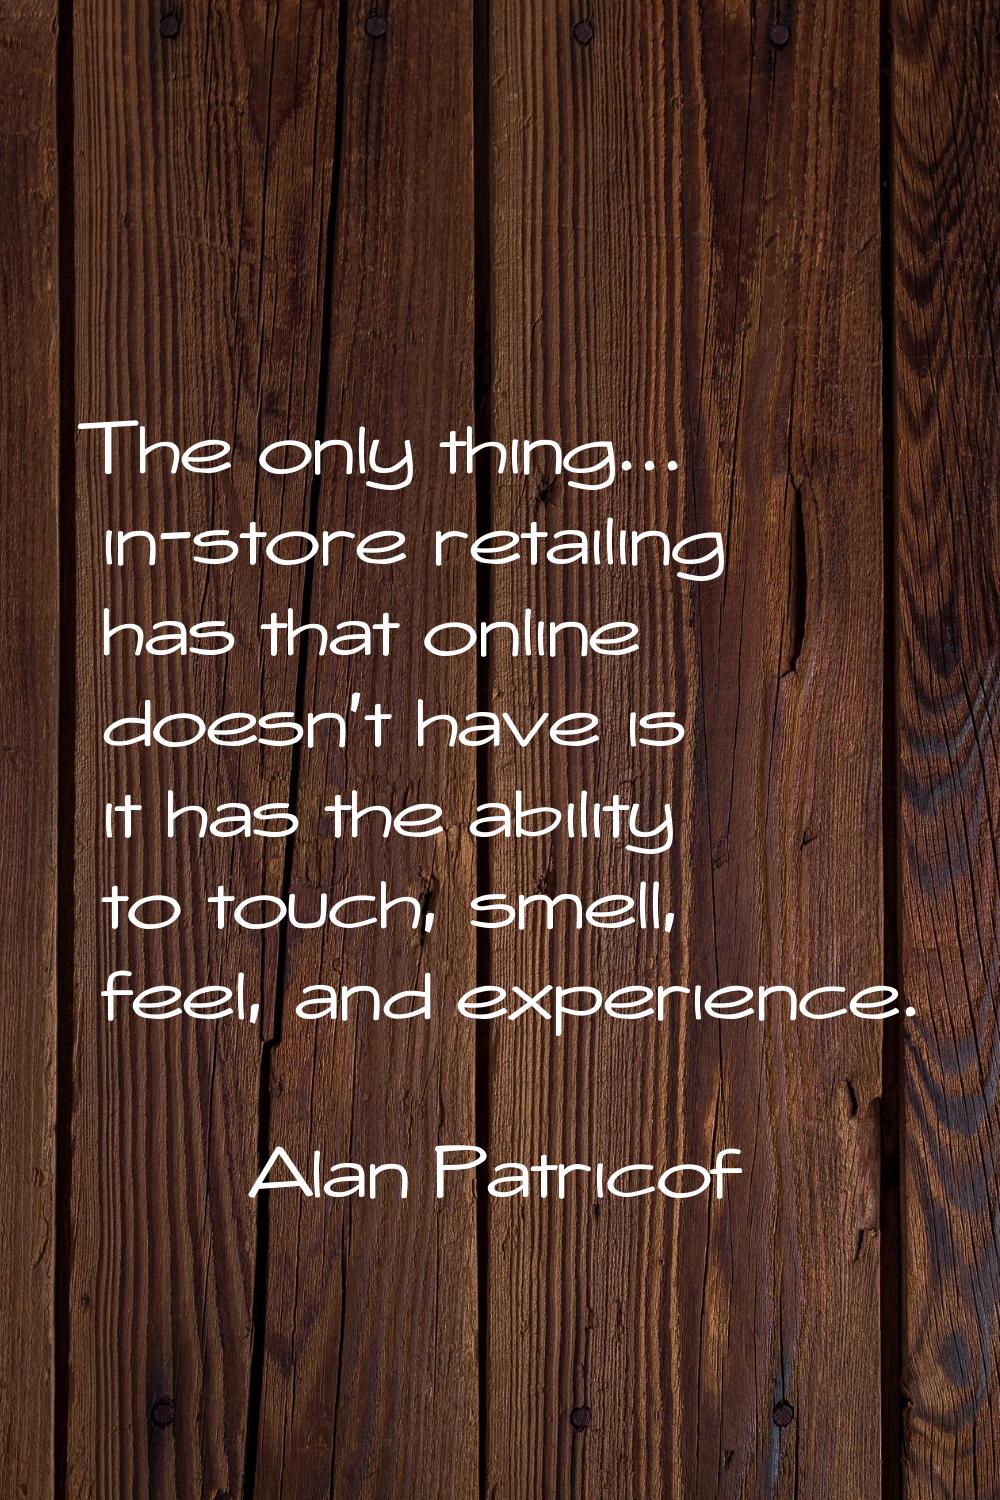 The only thing... in-store retailing has that online doesn't have is it has the ability to touch, s